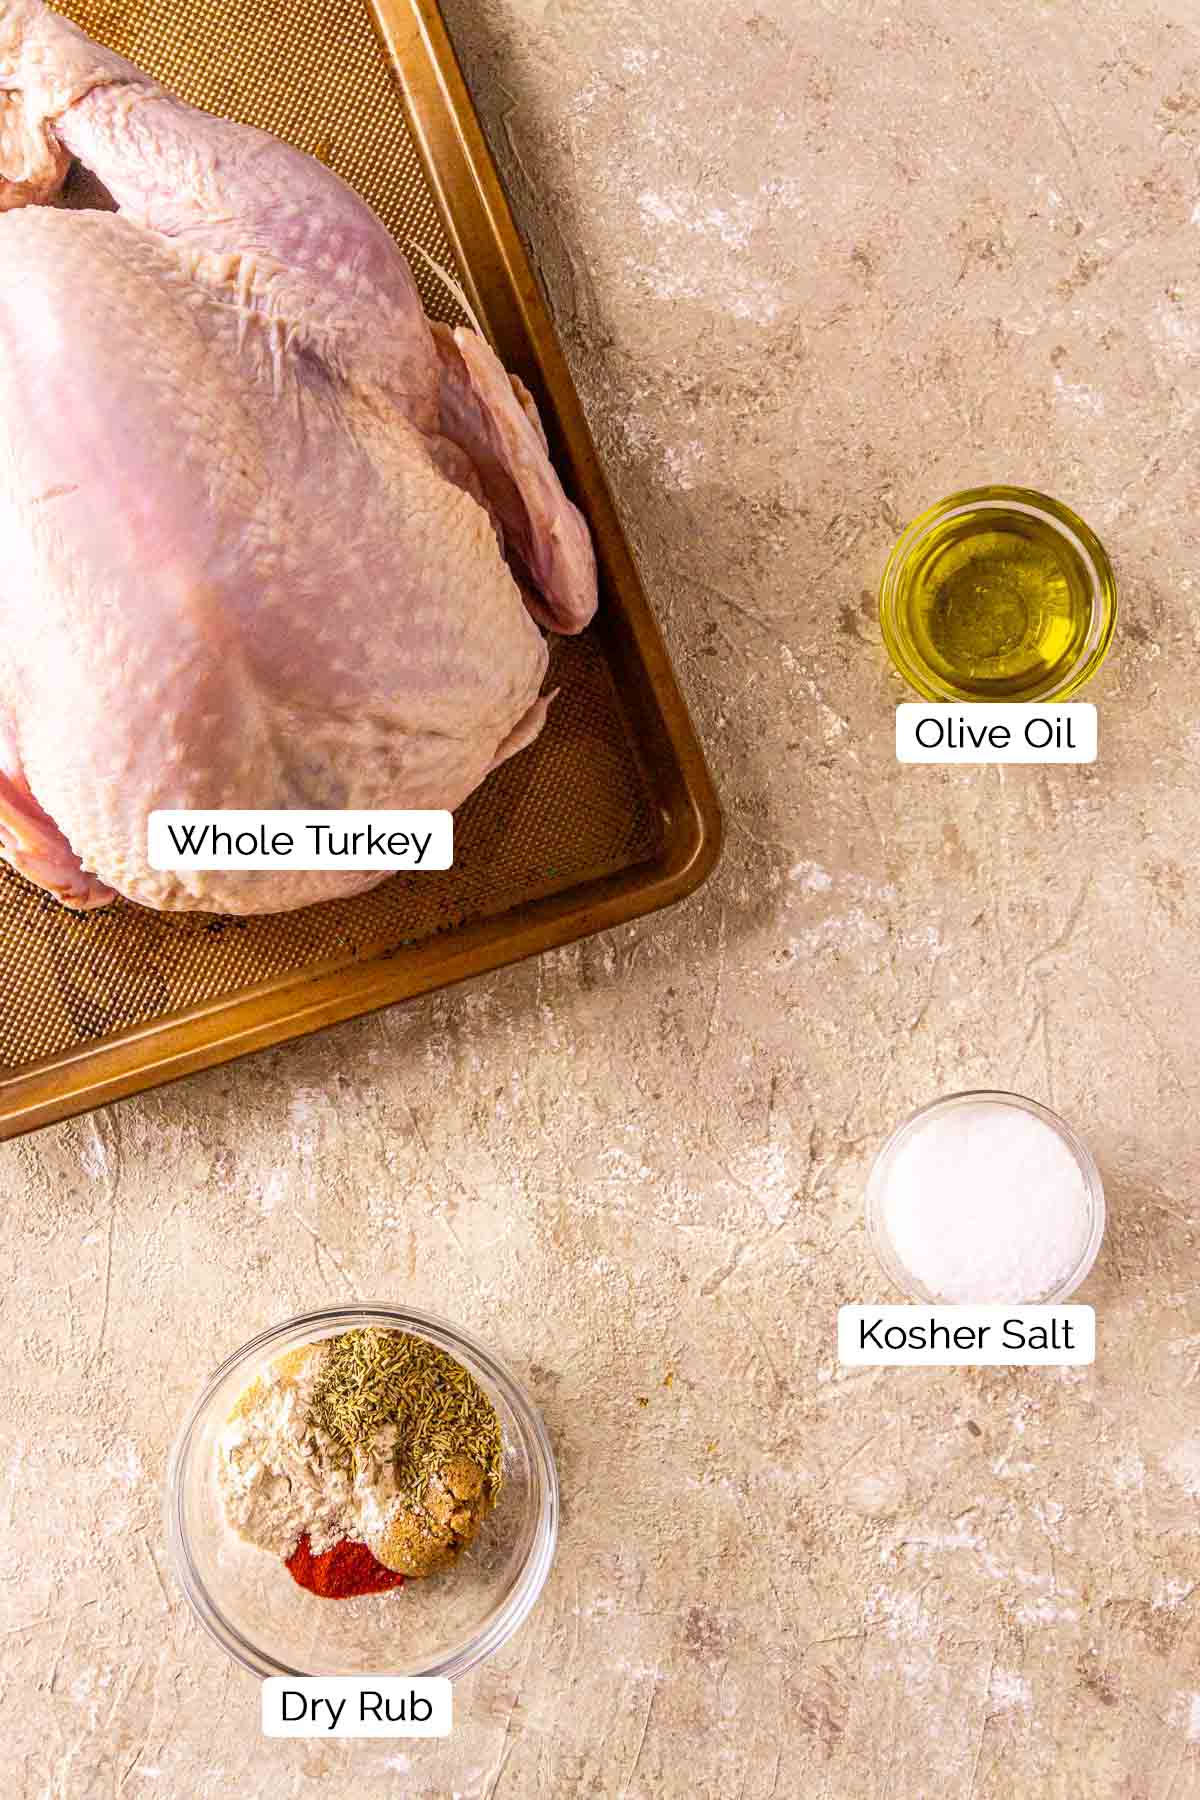 The ingredients for smoking the turkey on a cream-colored surface with white and black labels by the items.